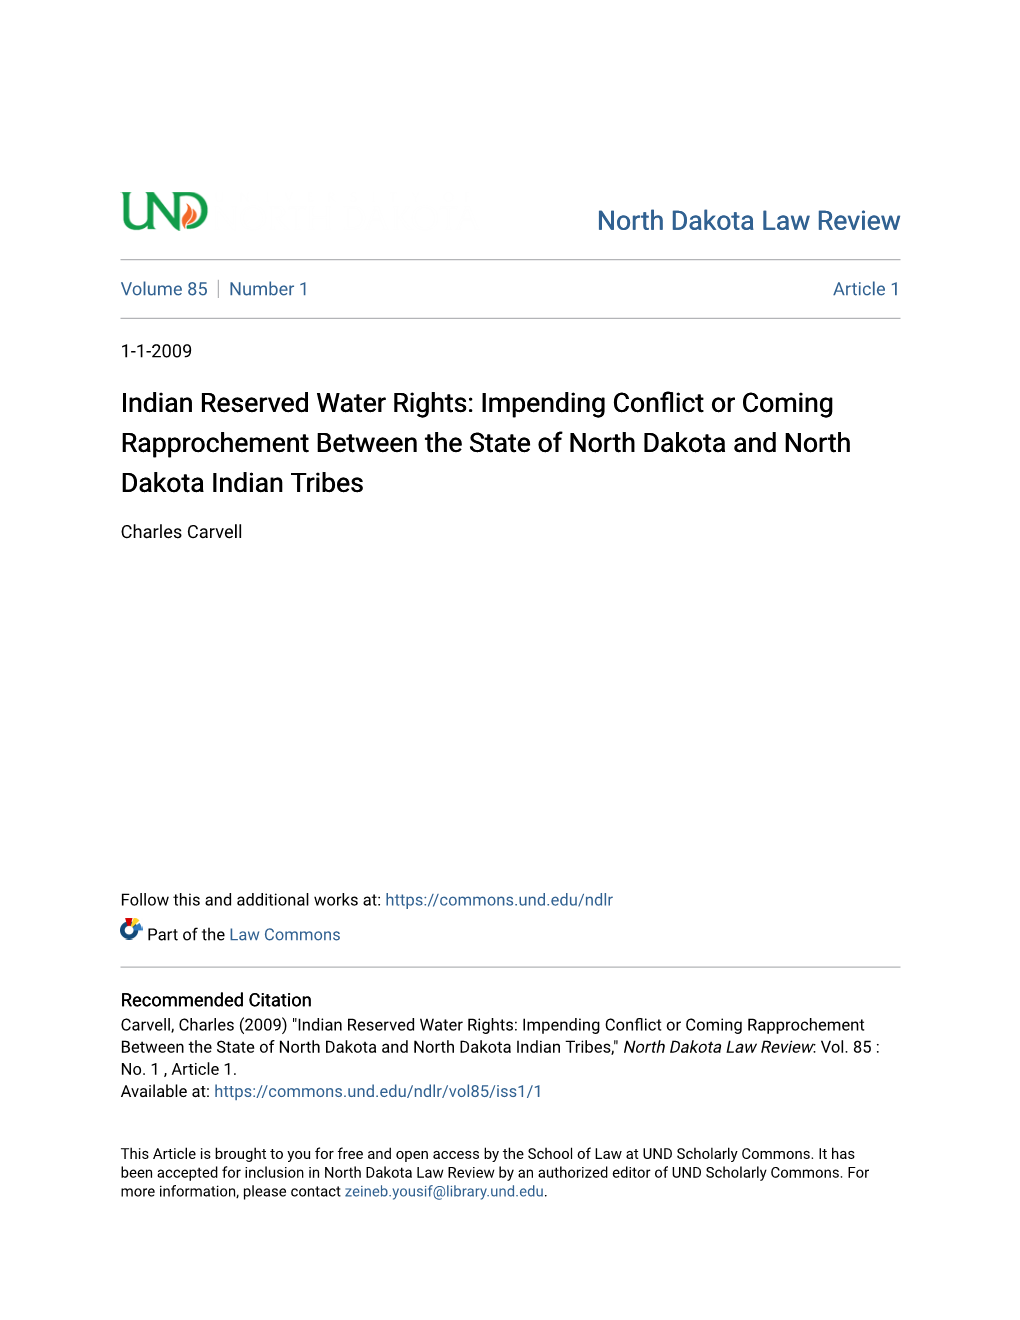 Indian Reserved Water Rights: Impending Conflict Or Coming Rapprochement Between the State of North Dakota and North Dakota Indian Tribes